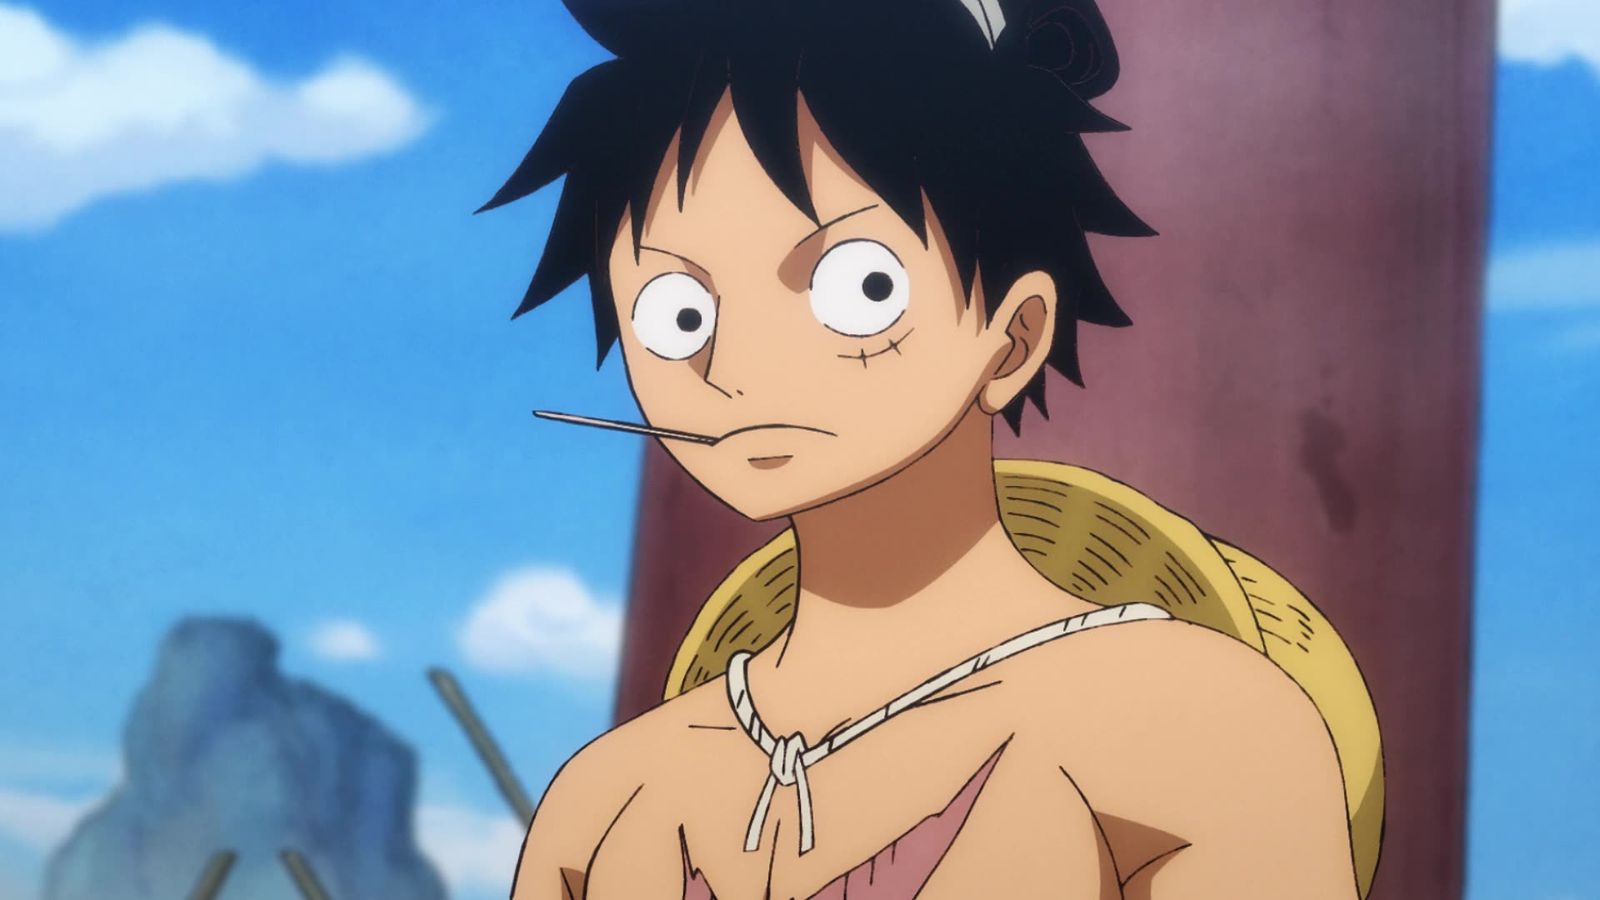 Who are One Piece’s Voice Actors? Sub & Dub Cast and Characters -Who is Luffy's Voice Actor in One Piece?